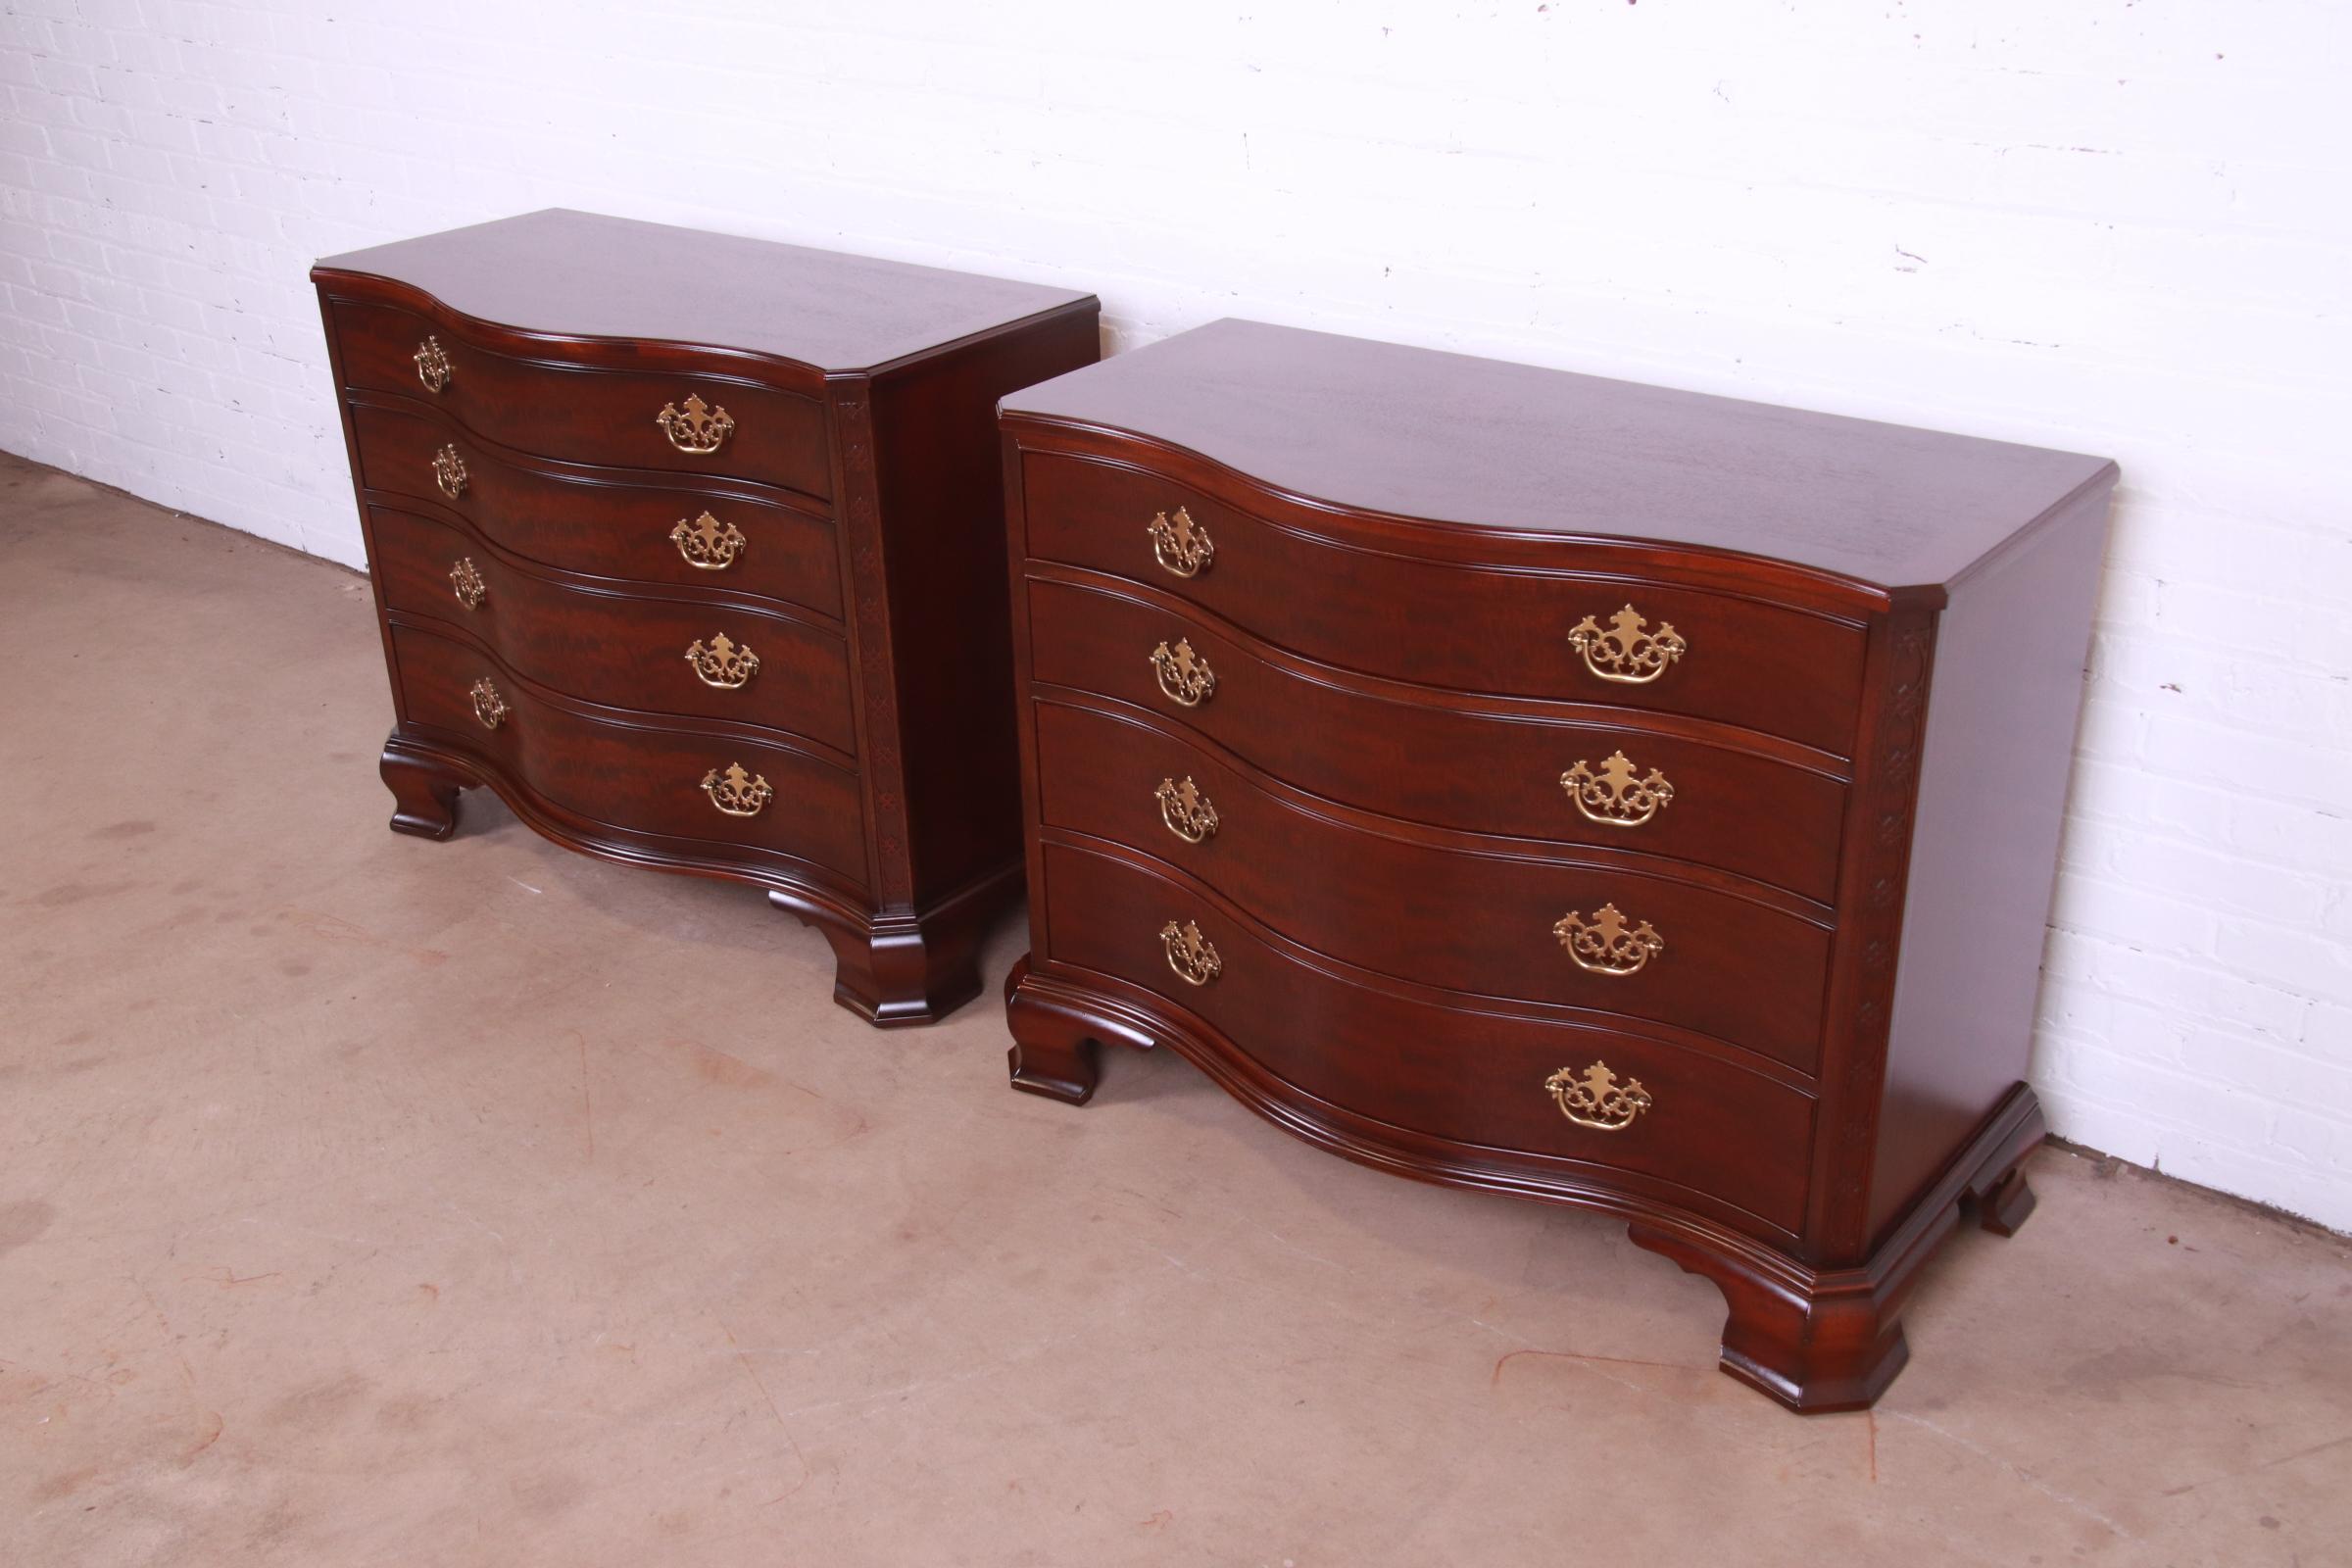 20th Century Baker Furniture Chippendale Carved Mahogany Serpentine Dresser Chests, Pair For Sale